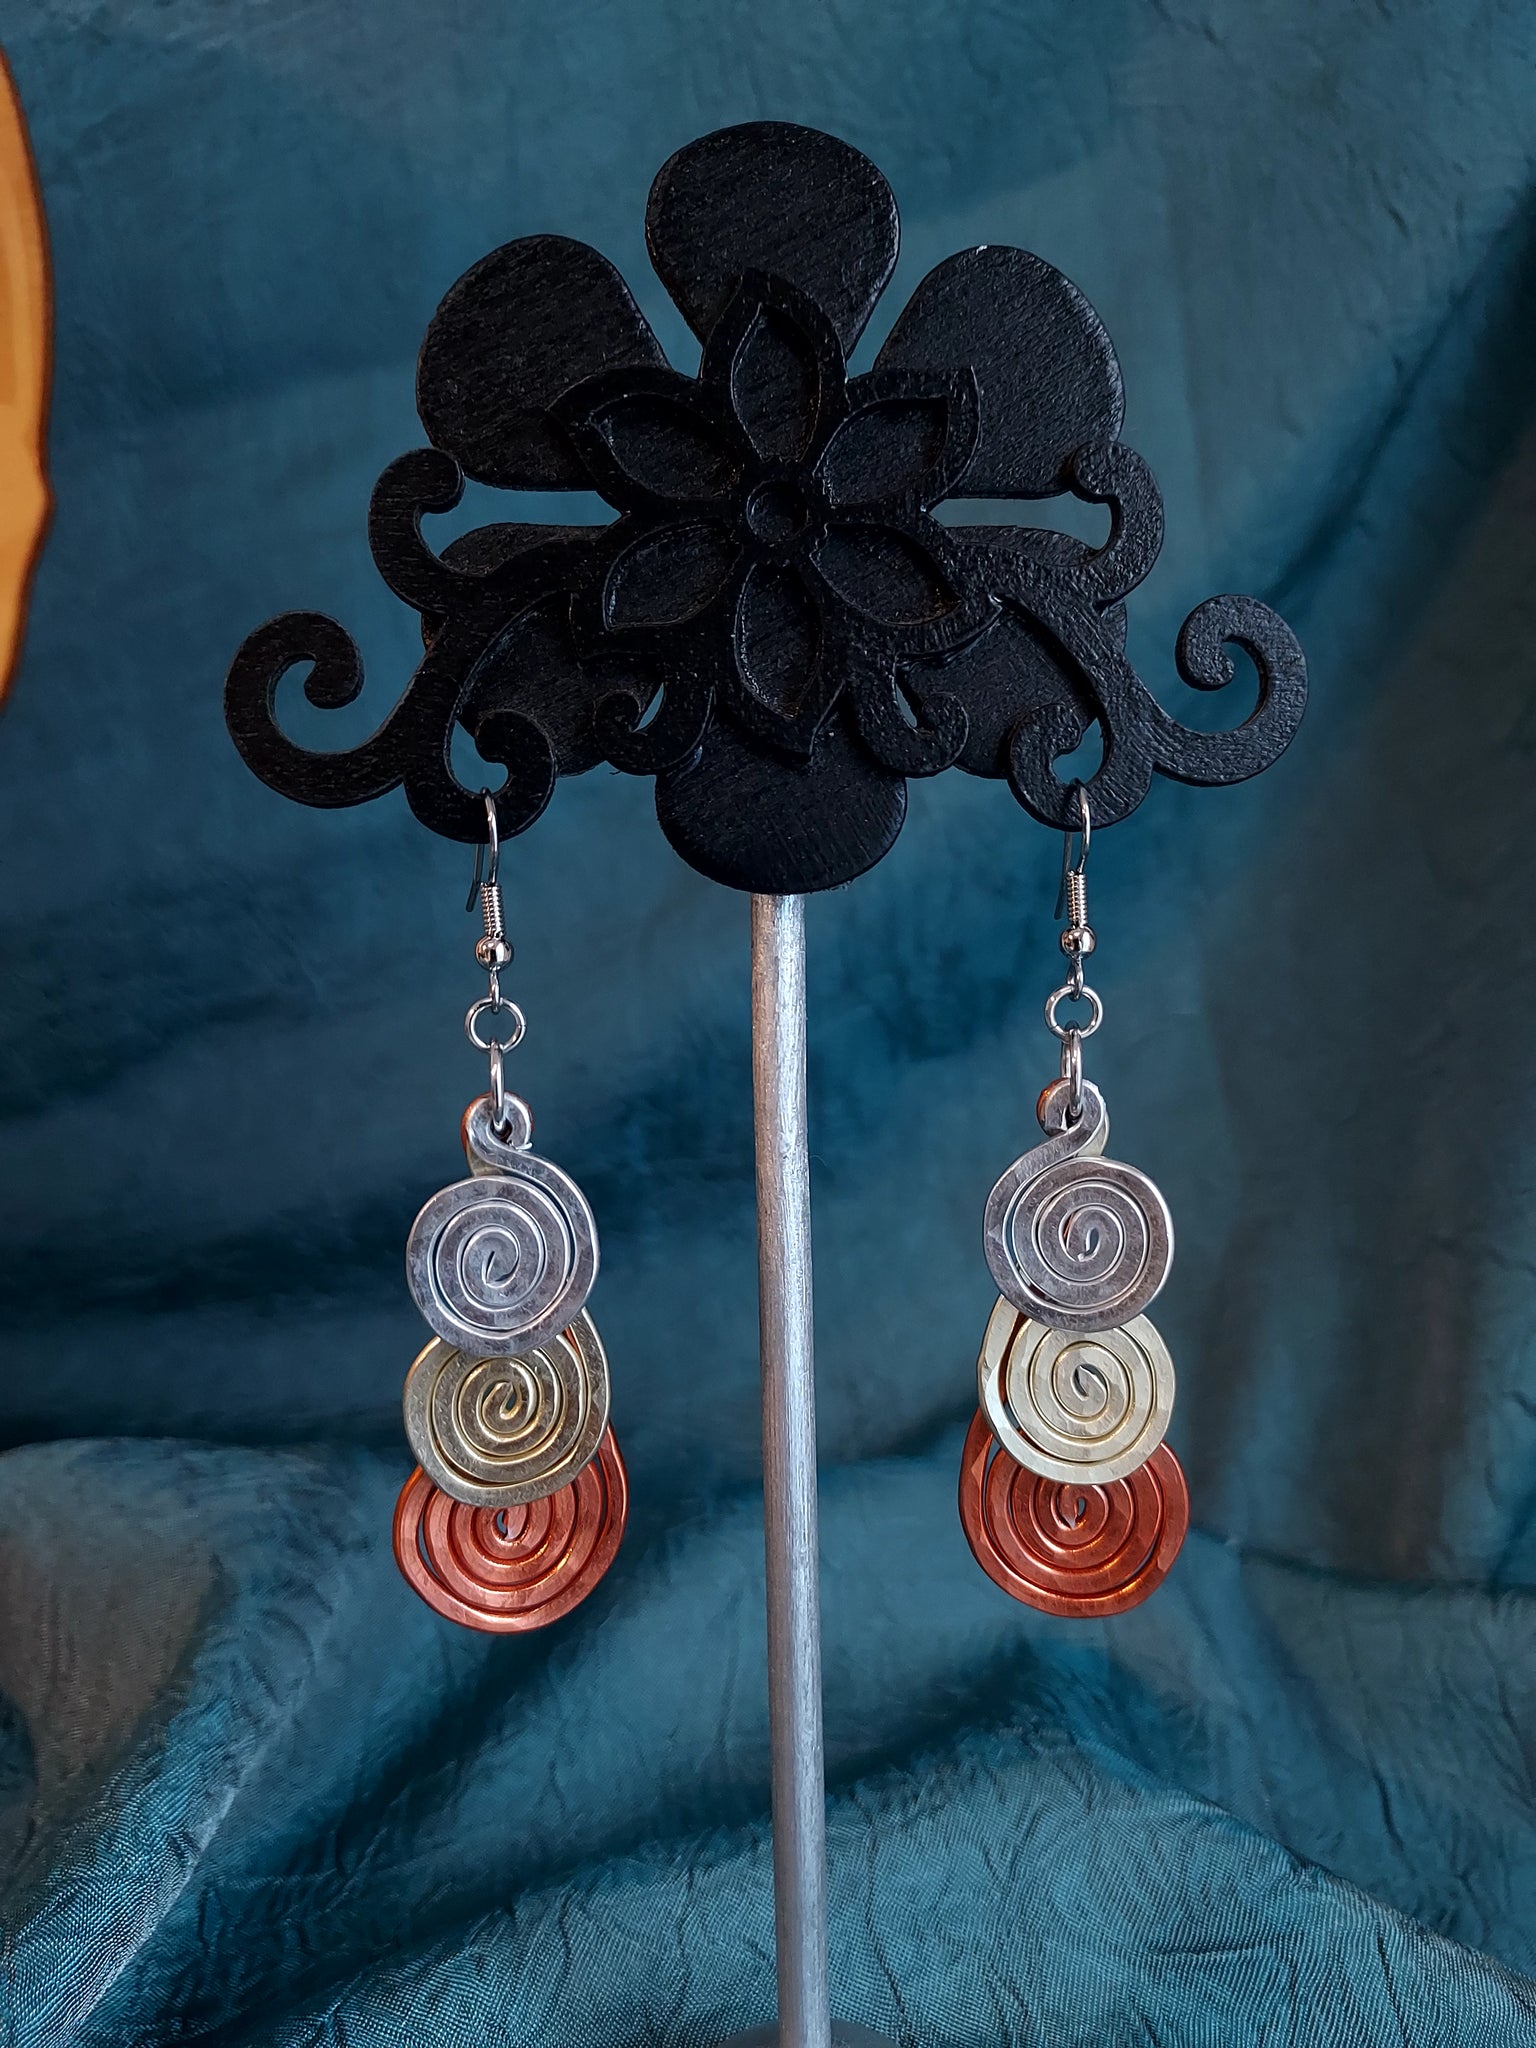 Handmade Hammered Tri Color Aluminum Earrings on Surgical Steel Ear wires